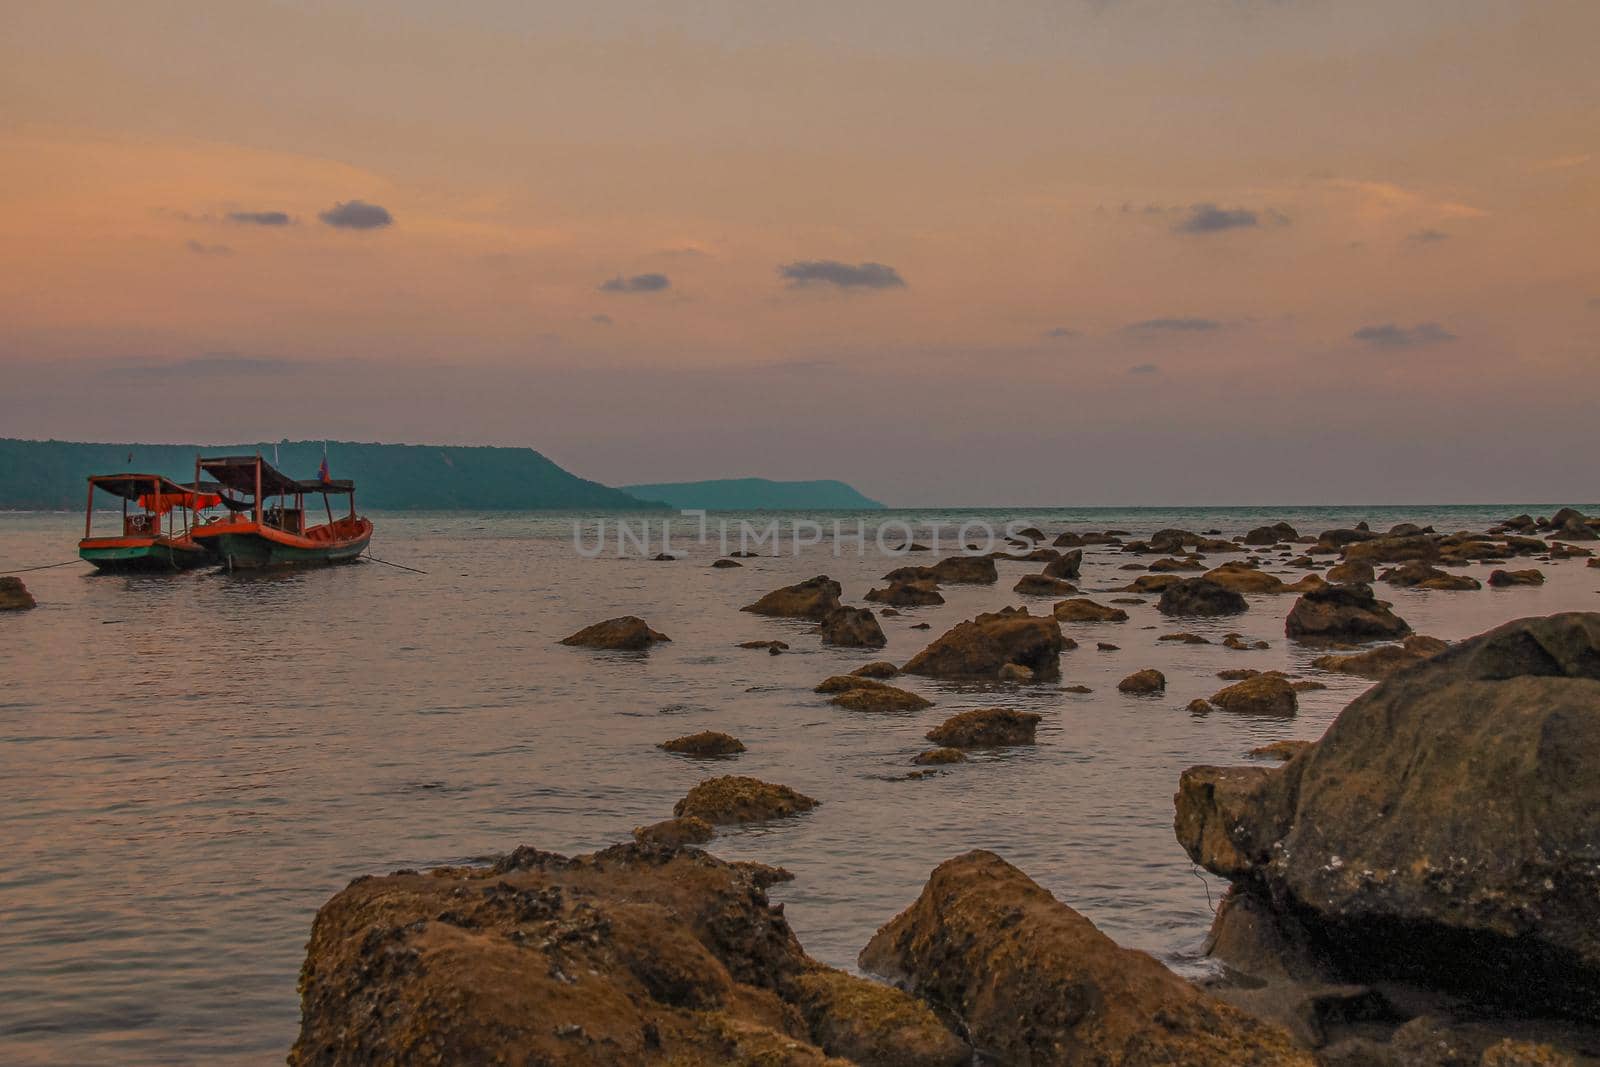 Wide angle view of khmer fishing boats on the rocky beach of Koh Rong Island in Cambodia